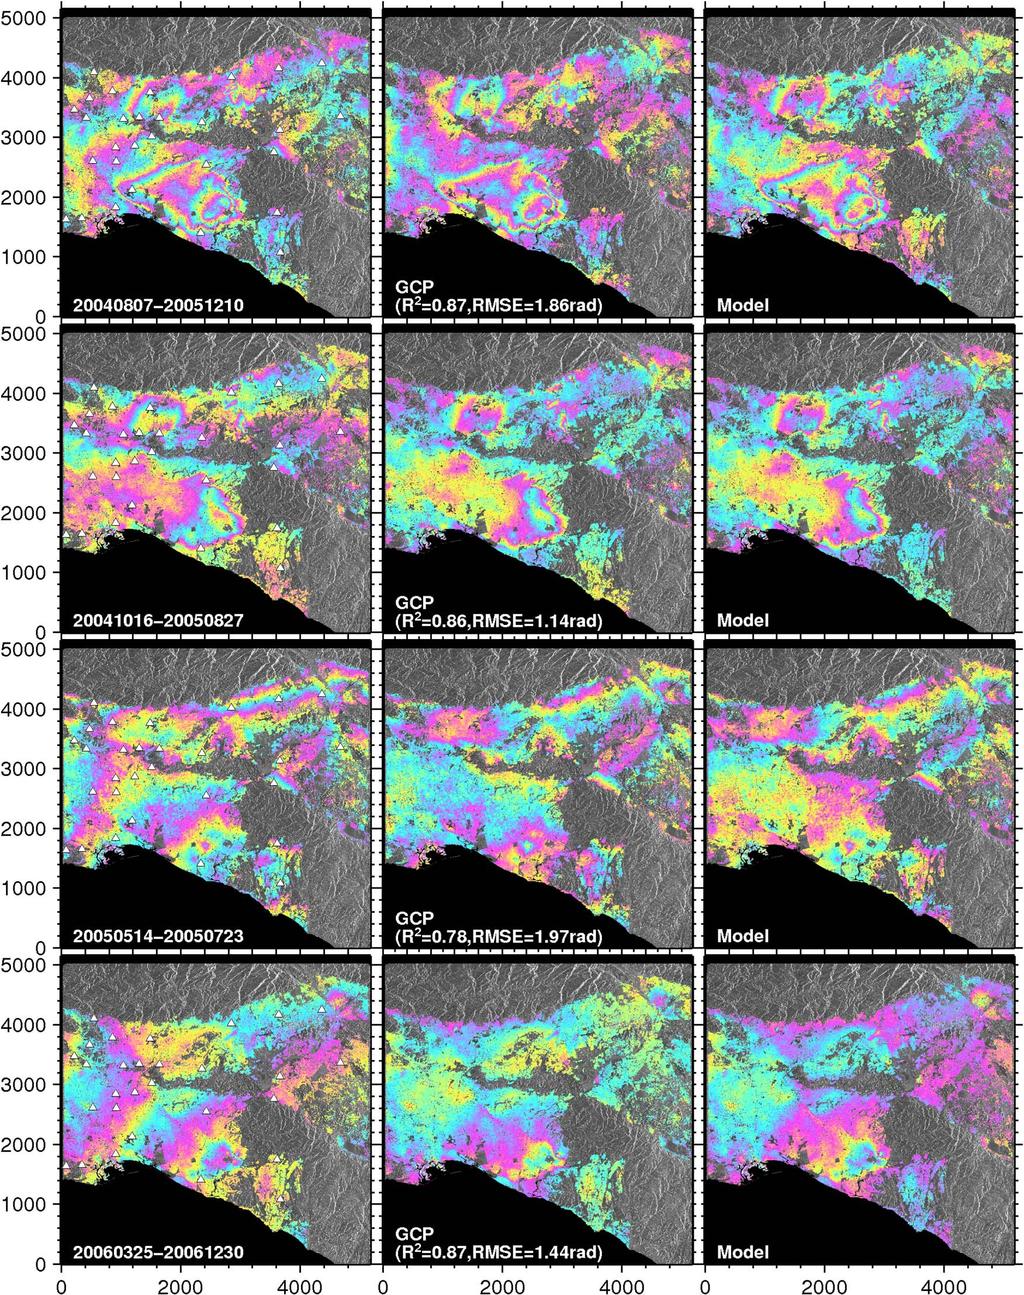 3536 IEEE TRANSACTIONS ON GEOSCIENCE AND REMOTE SENSING, VOL. 52, NO. 6, JUNE 2014 Fig. 7. Comparison between the GCP-based and the proposed approaches for orbit error mitigation.